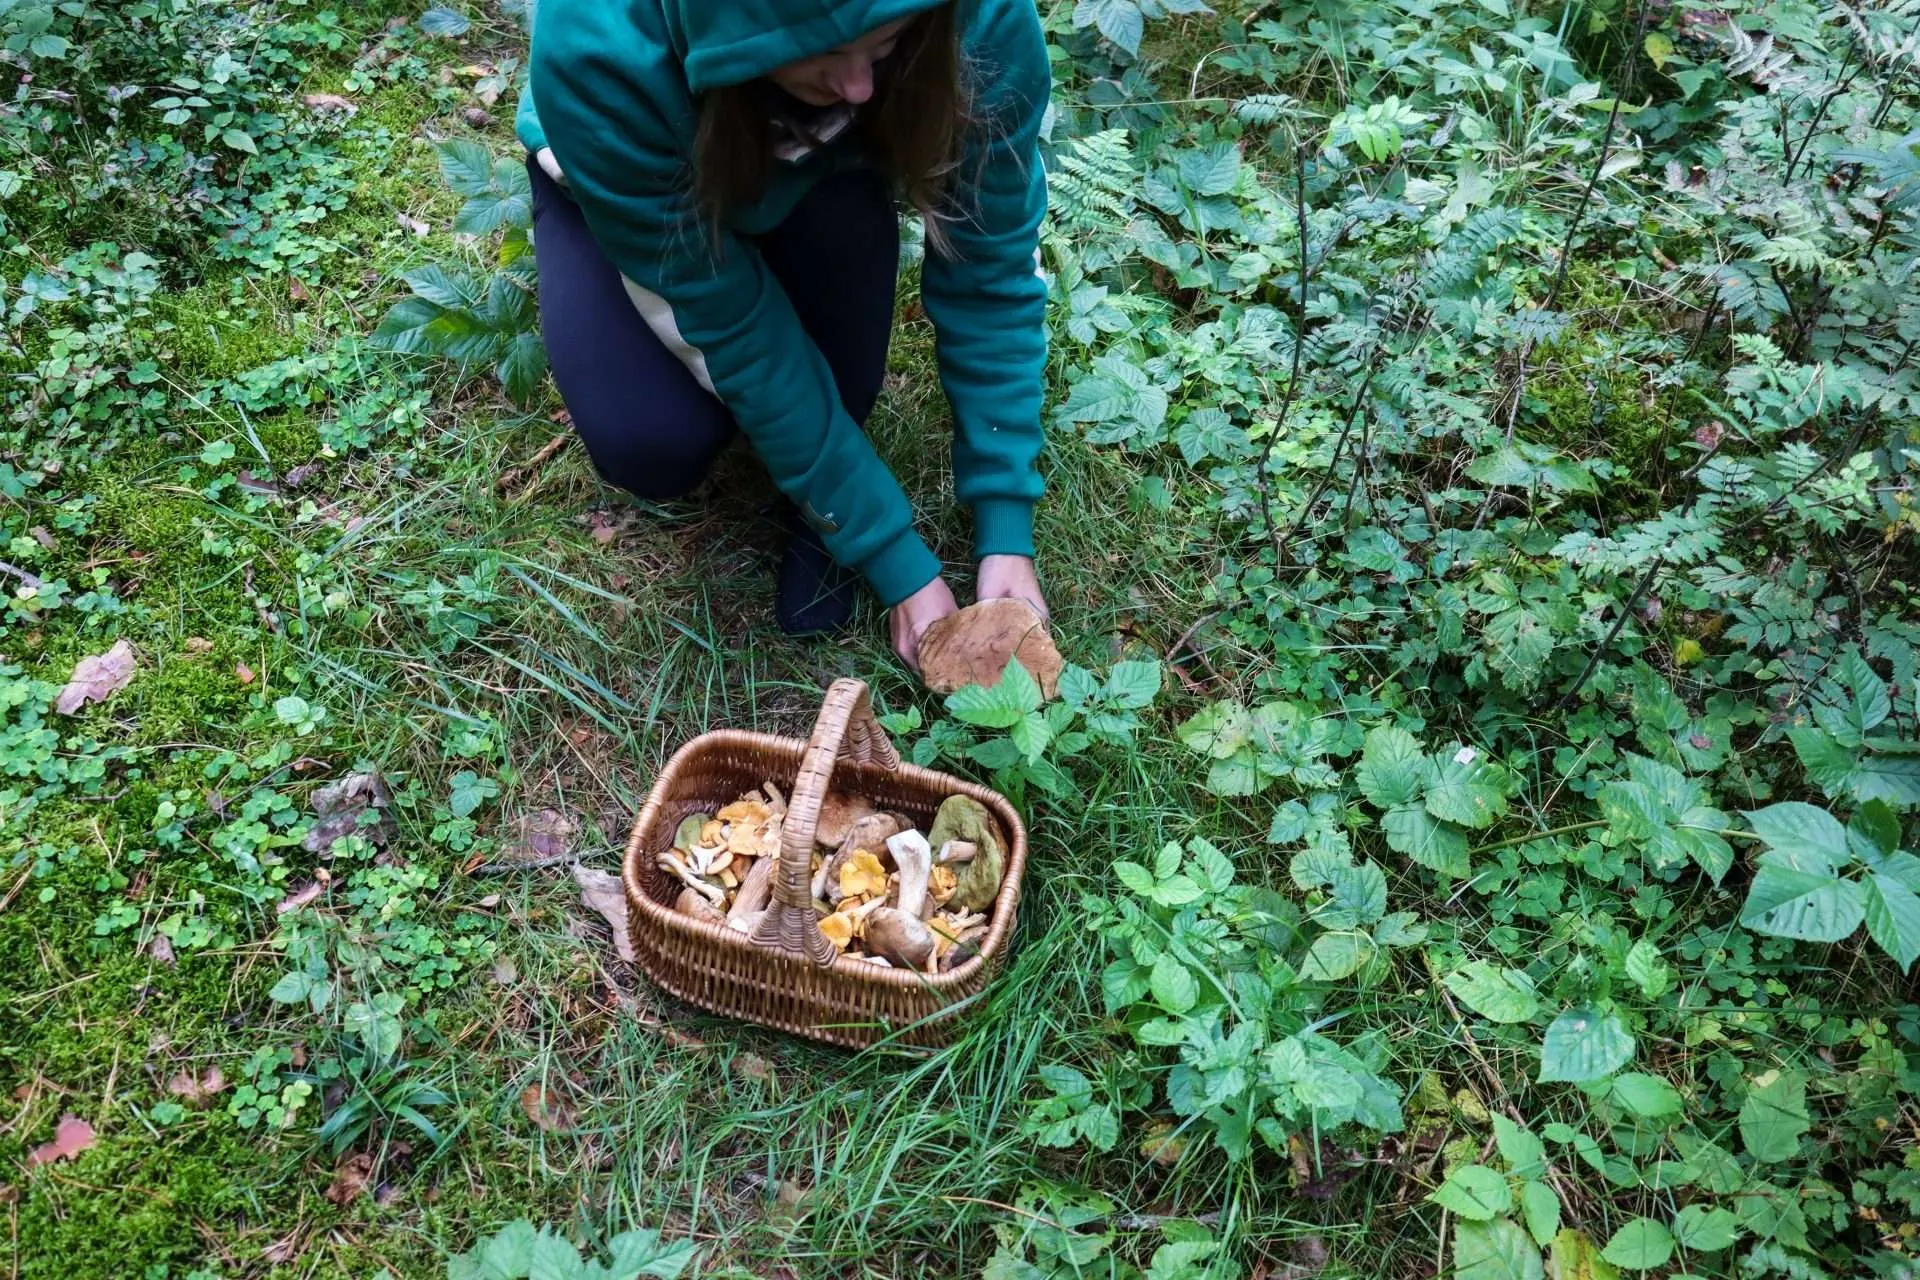 Woman foraging plants in a forest.